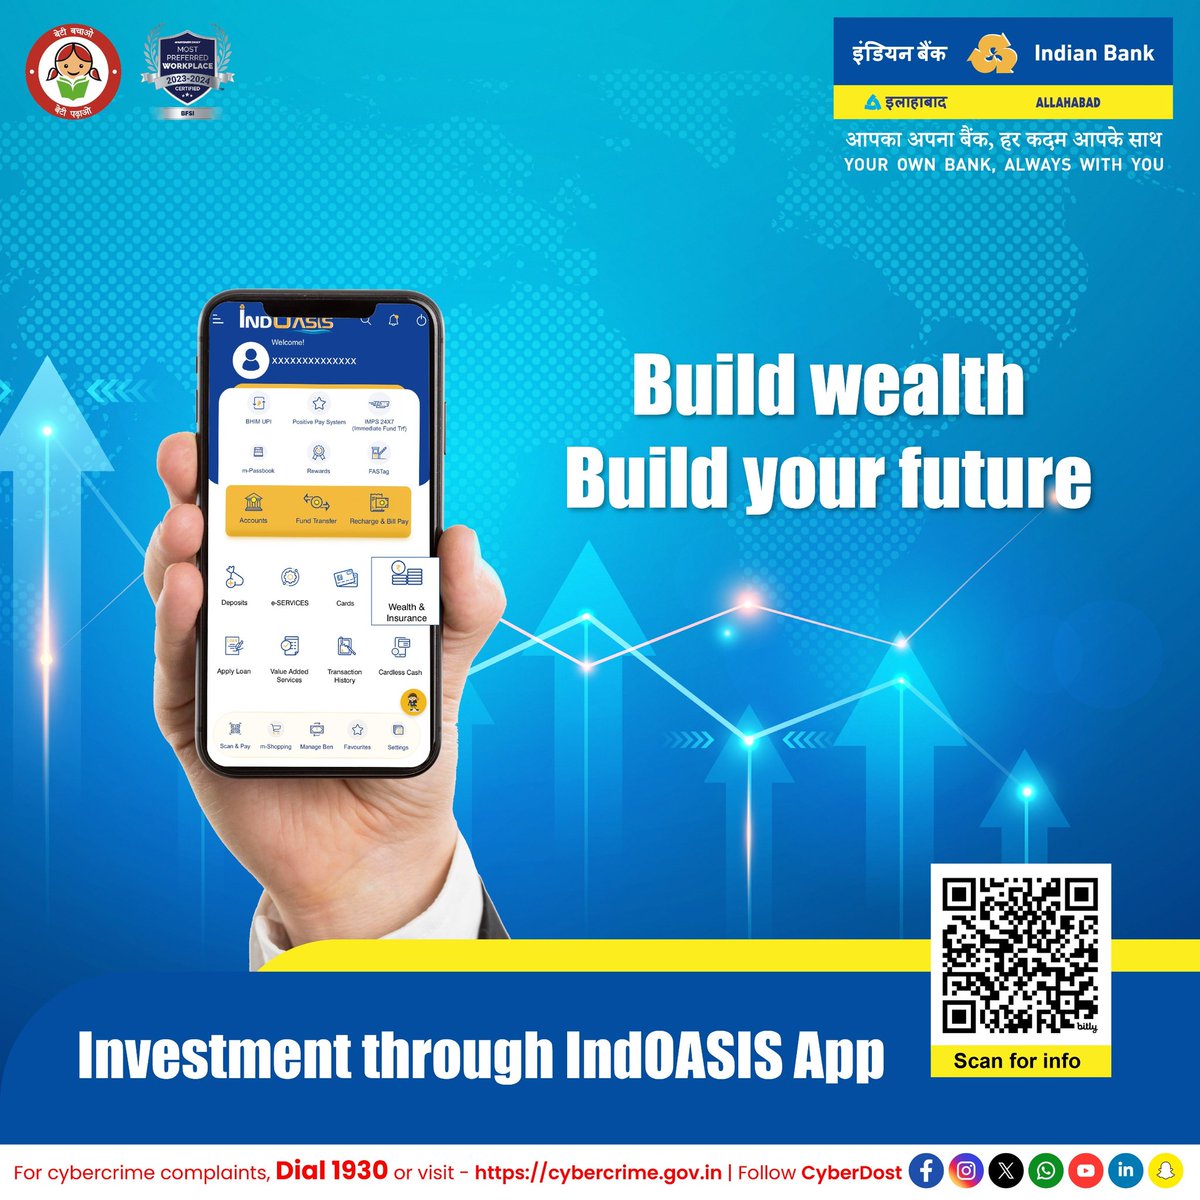 Discover the perfect investment avenue with IndOASIS App, where your financial aspirations meet our tailored solutions. It helps you build a brighter tomorrow, ensuring your money works smarter! Know More : bit.ly/IB_indoasis #IndianBank @DFS_India